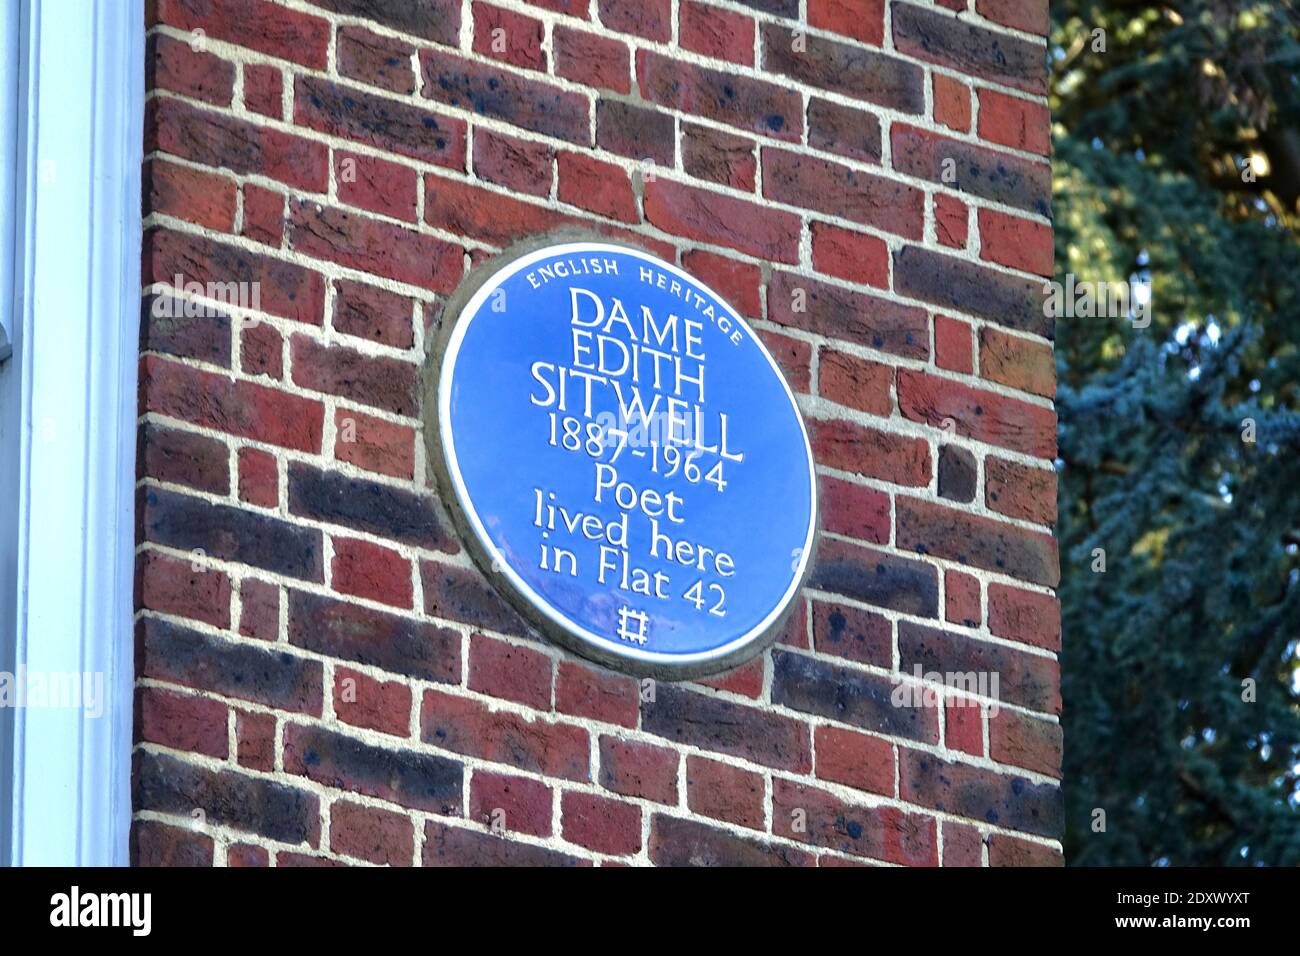 Dame Edith Sitwell, poet, blue plaque erected by English Heritage on Hampstead High Street, London. Stock Photo